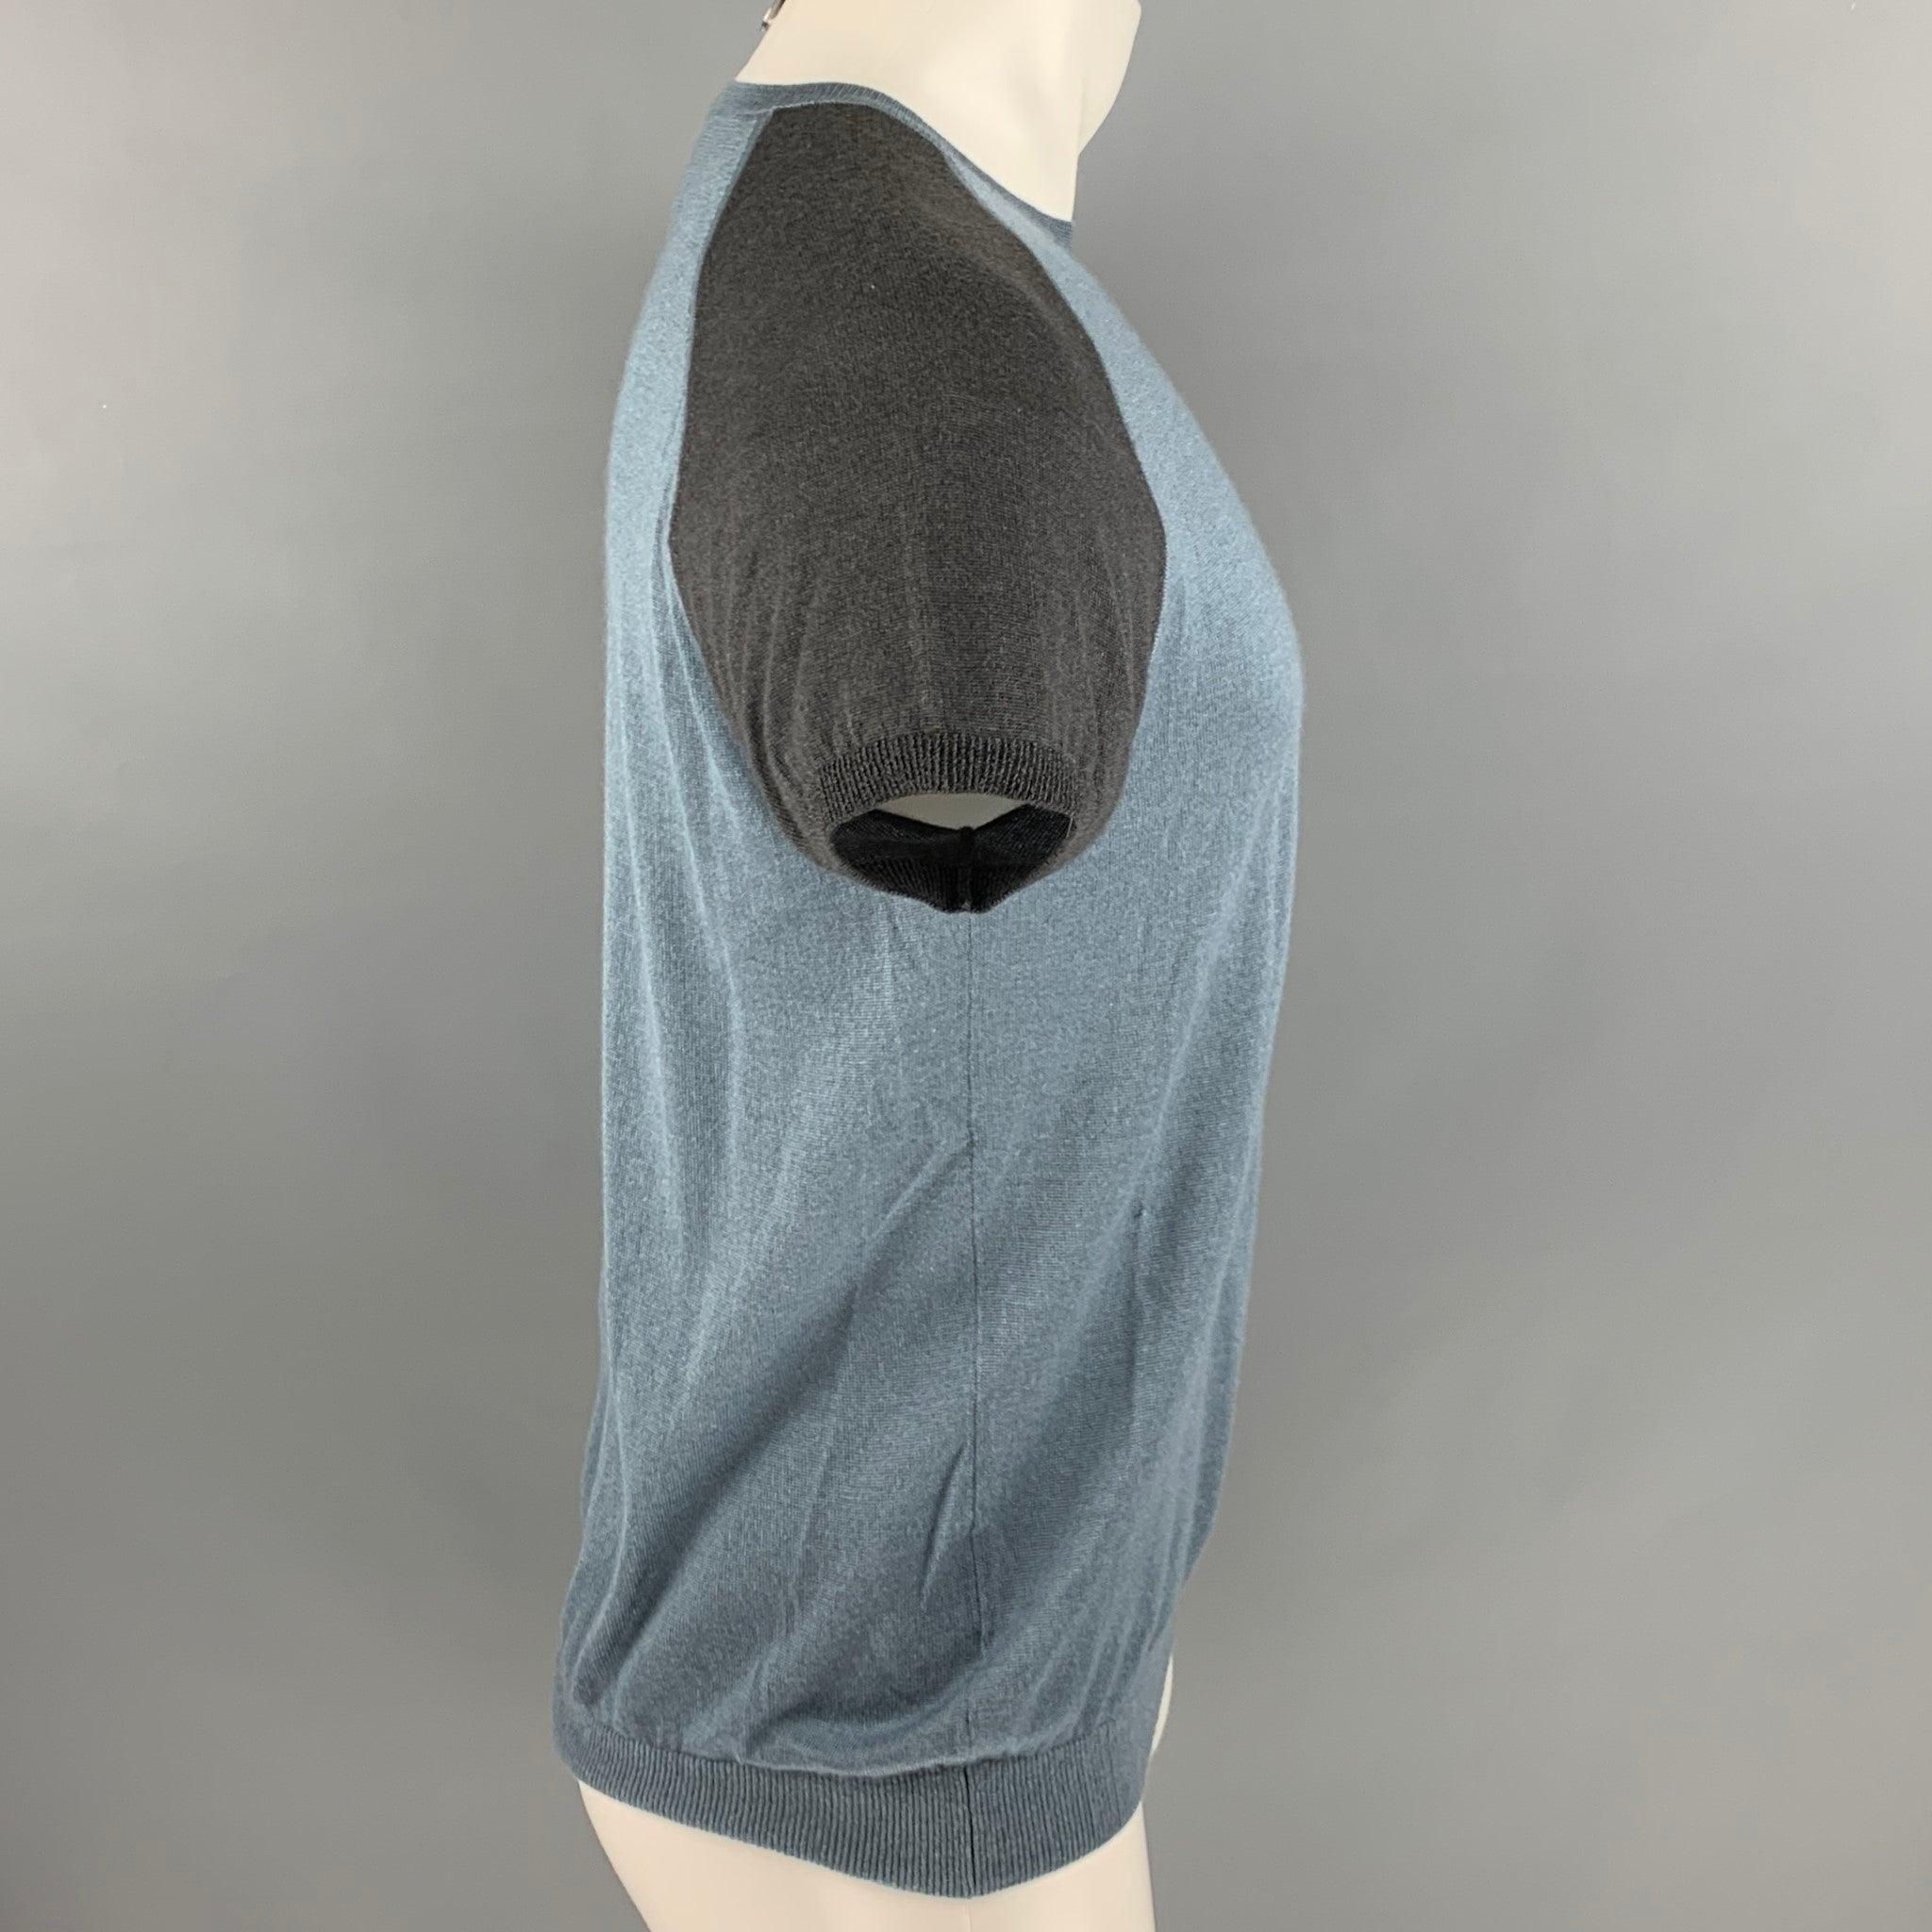 PRADA short sleeve pullover comes in a blue and grey cashmere silk blend, featuring color block pattern, and crew neck. Made in Italy.Very Good Pre-Owned Condition. Minor signs of wear. 

Marked:   50 

Measurements: 
 
Shoulder: 17 inches Chest: 41